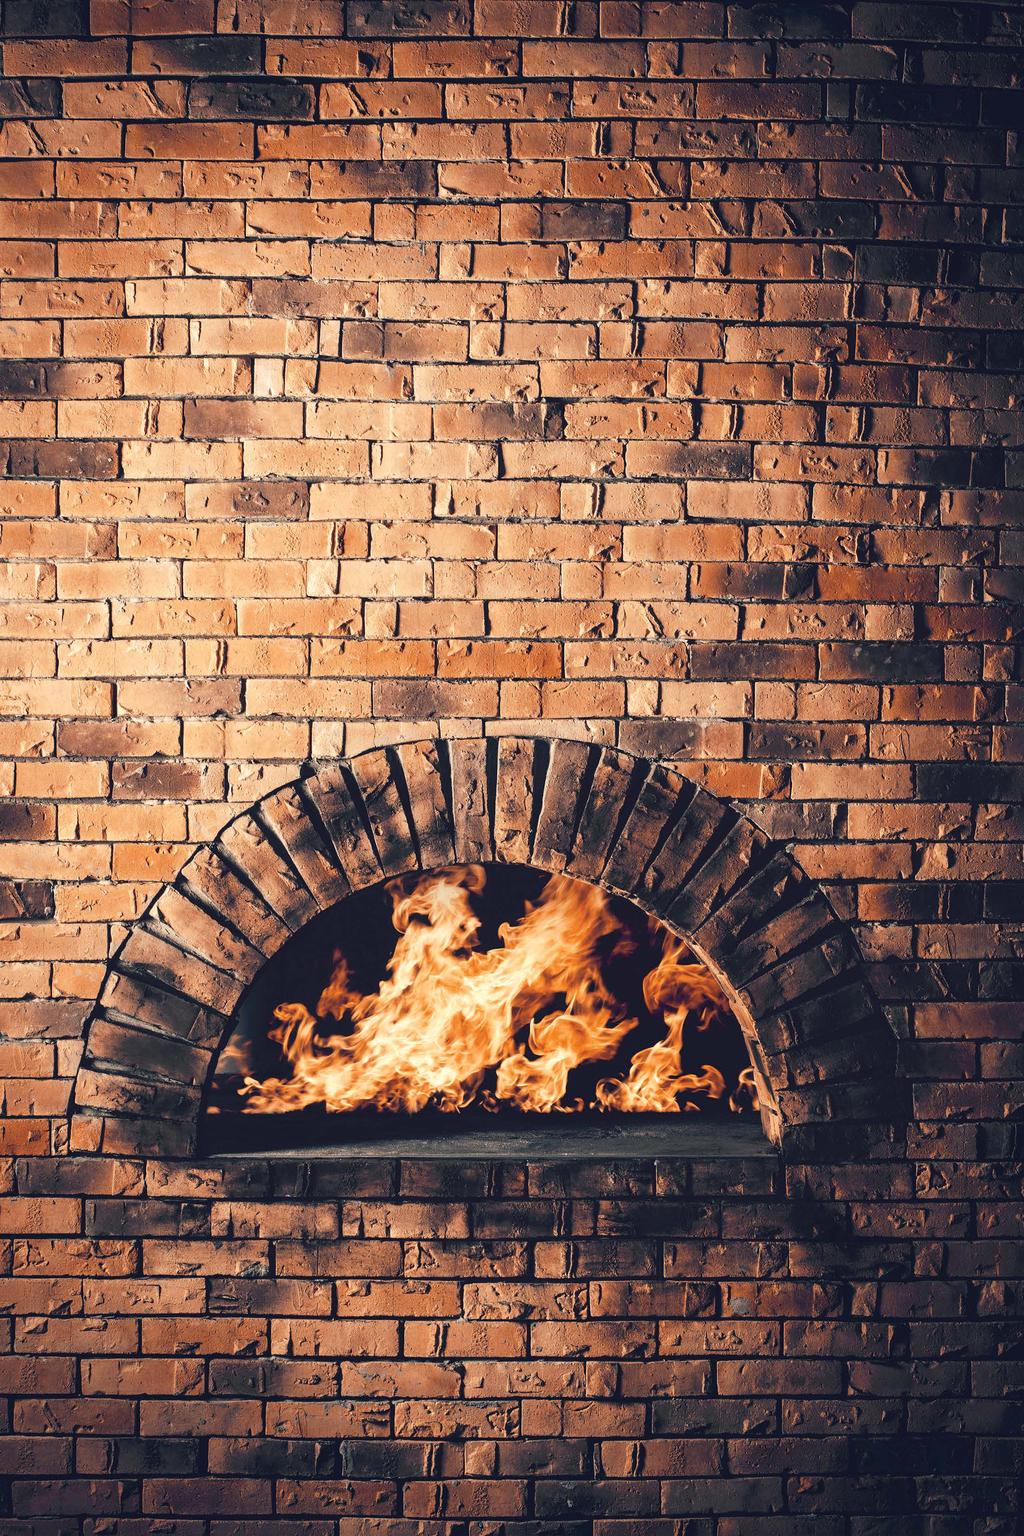 OUR WORK Our work is our pride. We work with the belief that hard work pays off and it always does. Our pizzas are baked in a wood-fired oven.